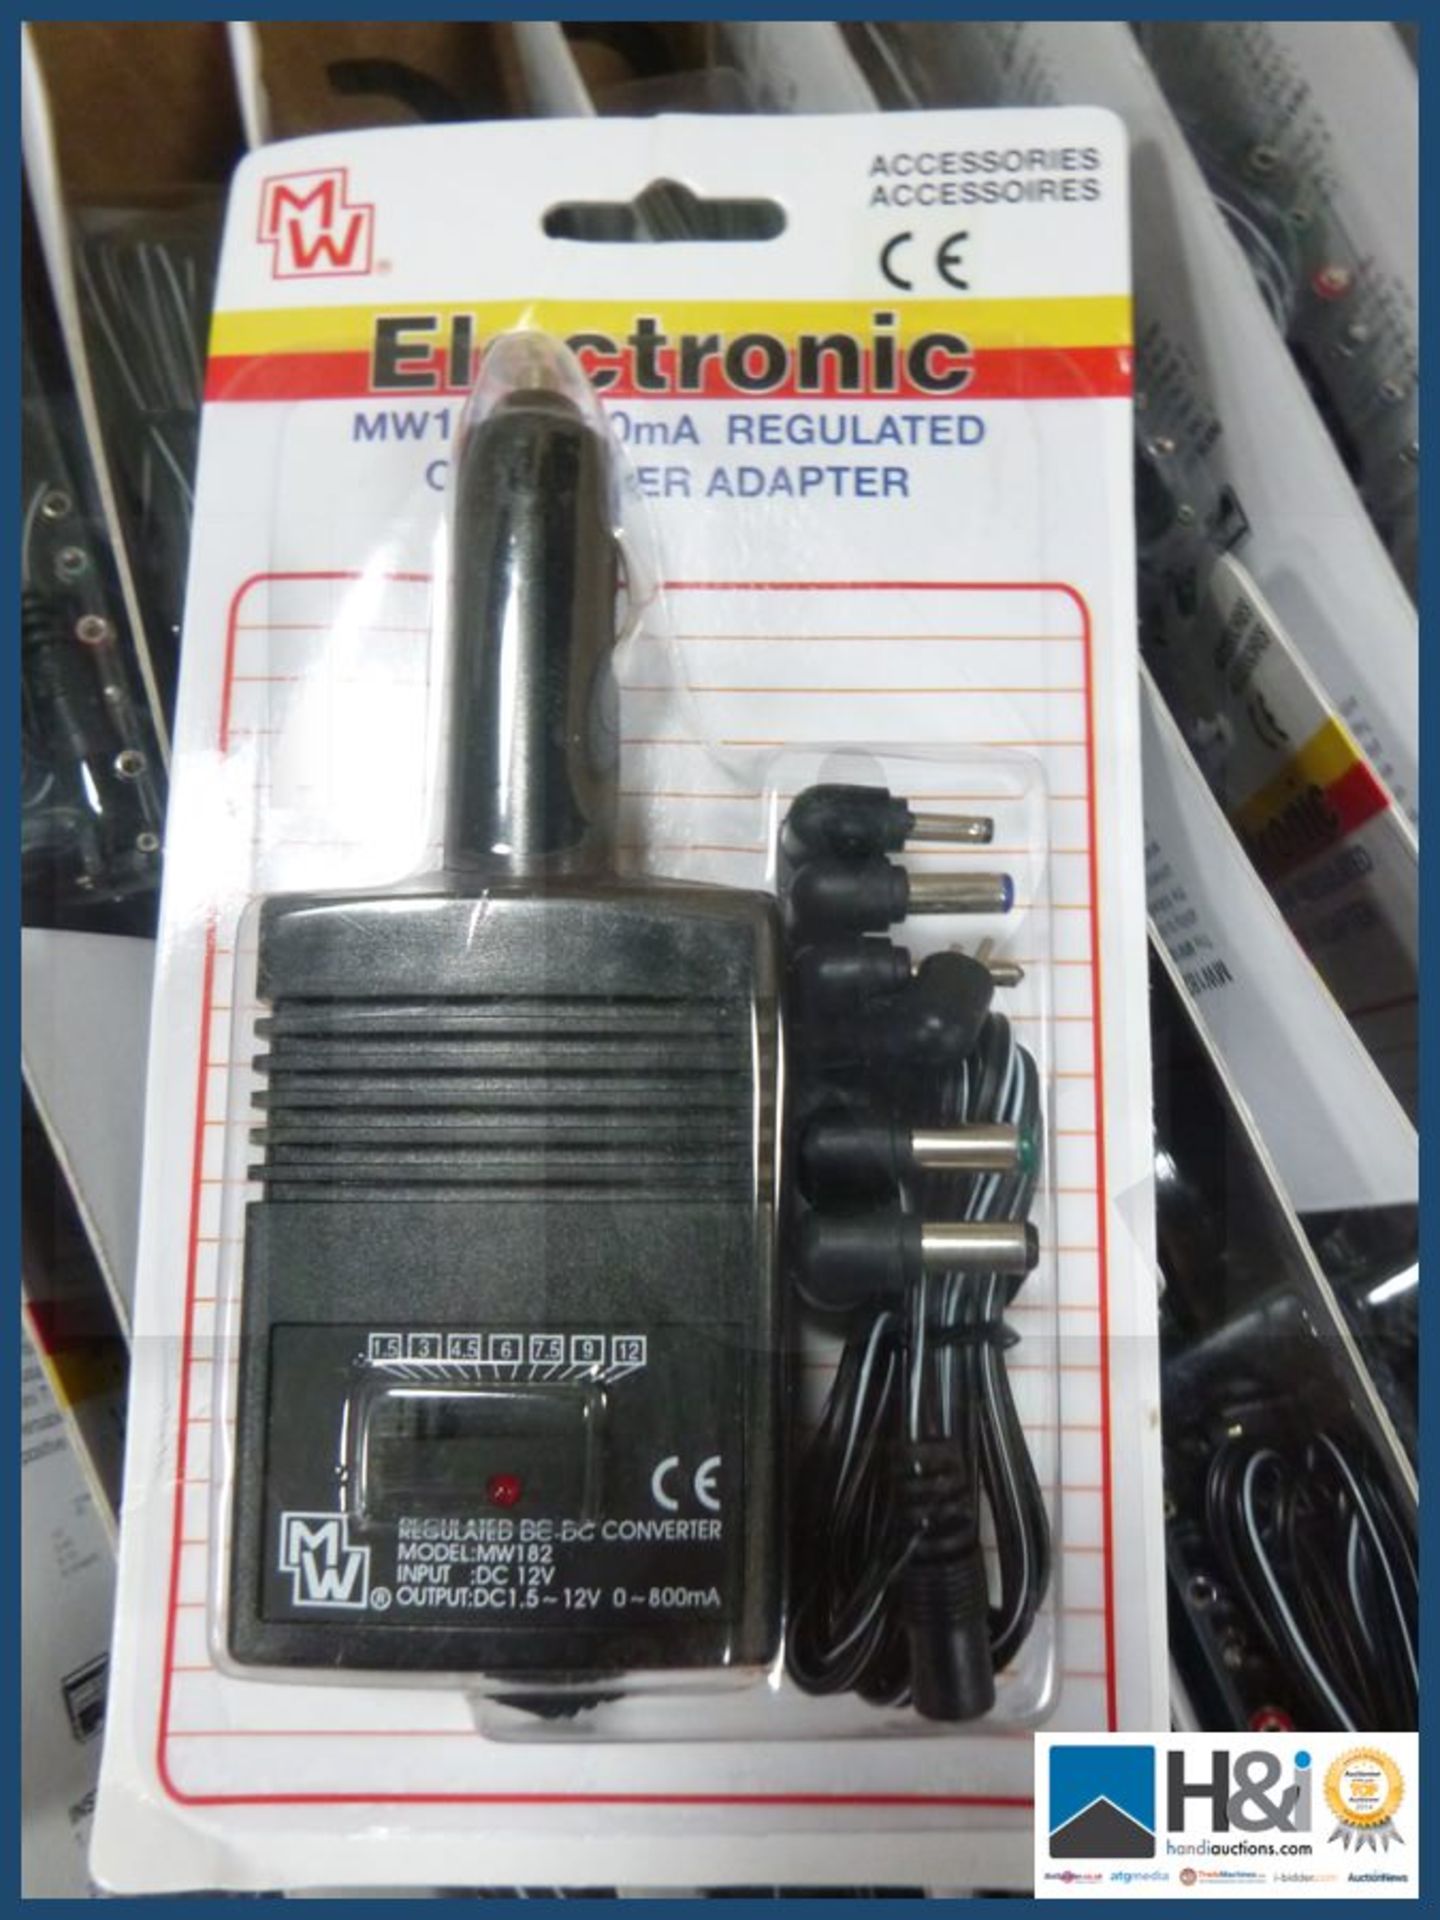 12v regulated car power adapter X 25 pcs. NO VAT on item except on buyers premium. Shipping and comb - Image 2 of 2